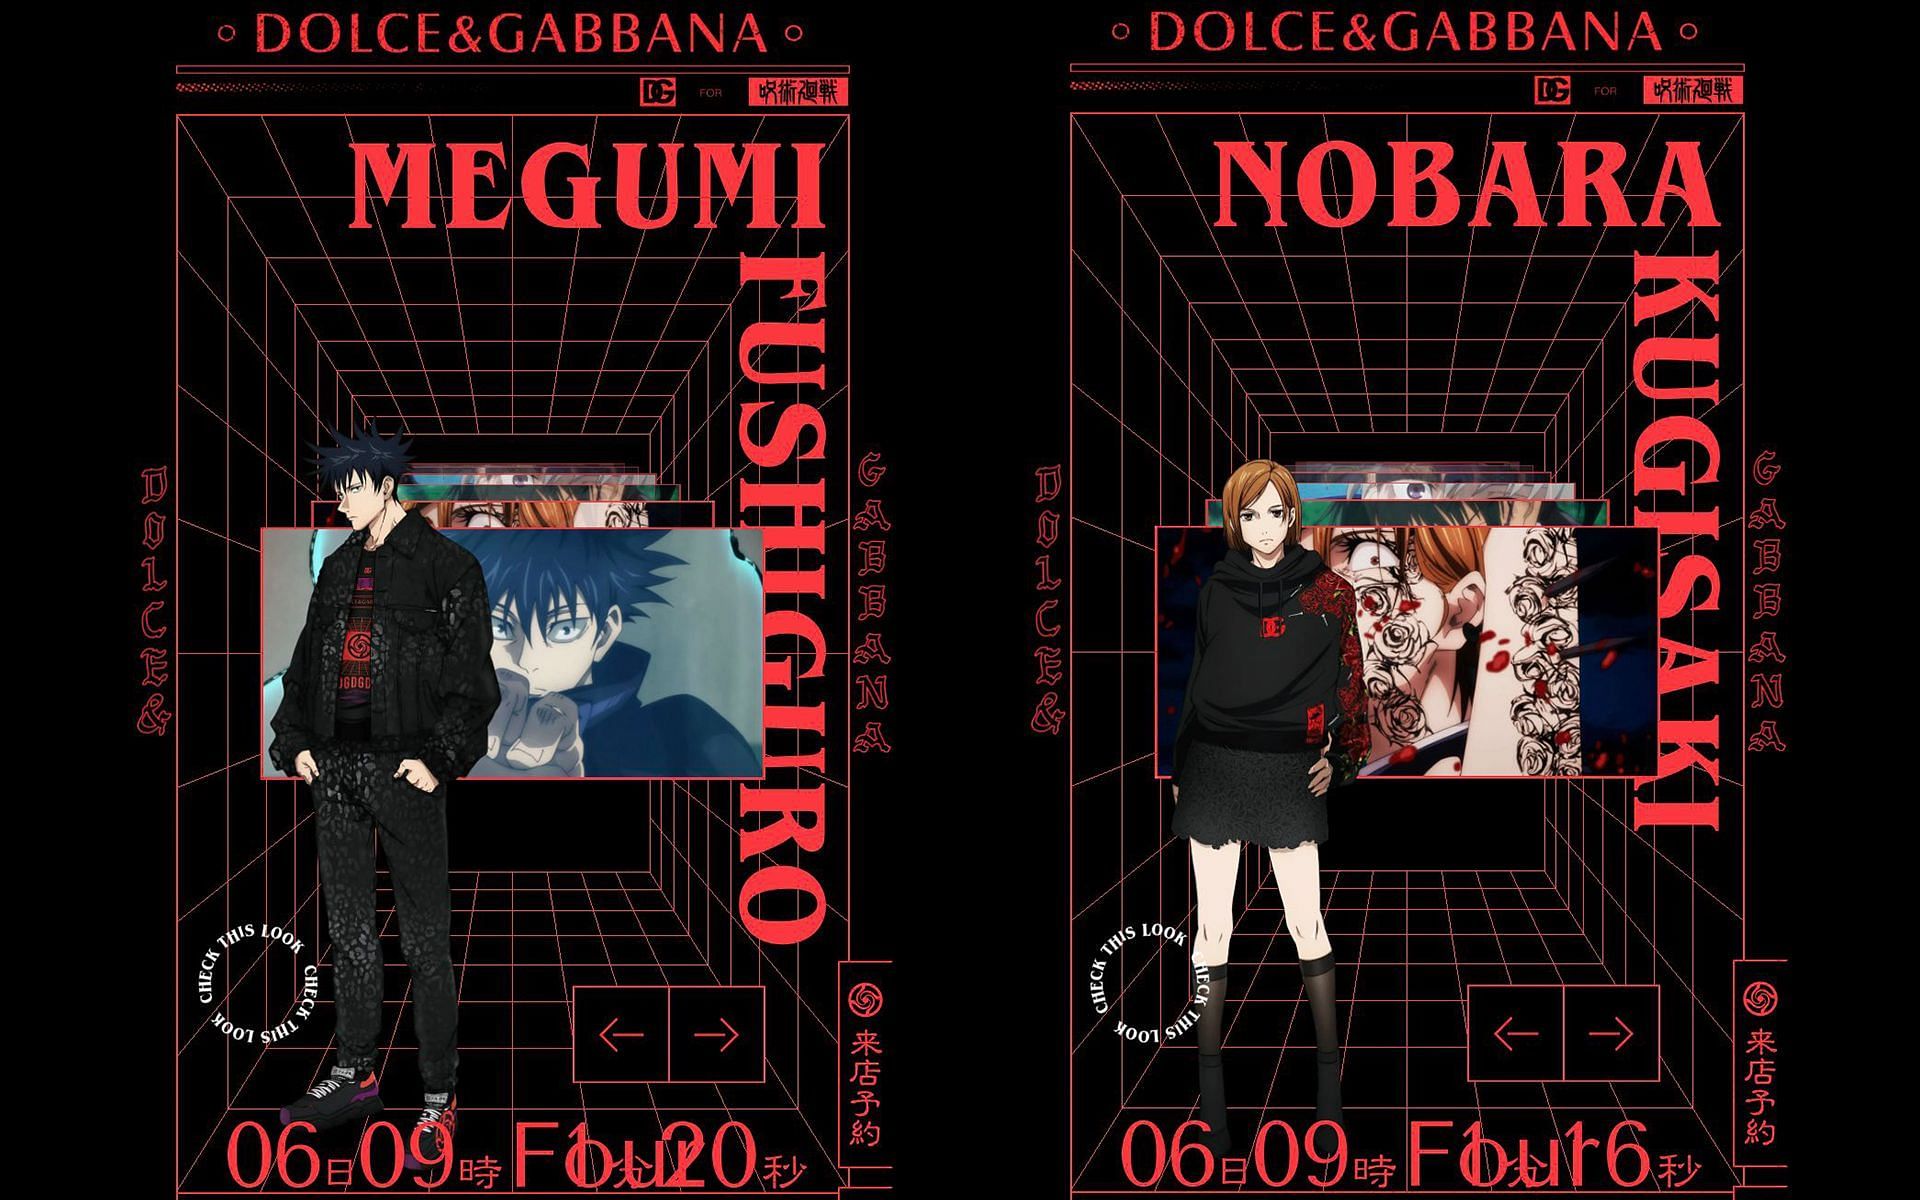 Jujutsu Kaisen x Dolce & Gabbana collection: Where to get, release date,  and more about the anime collab